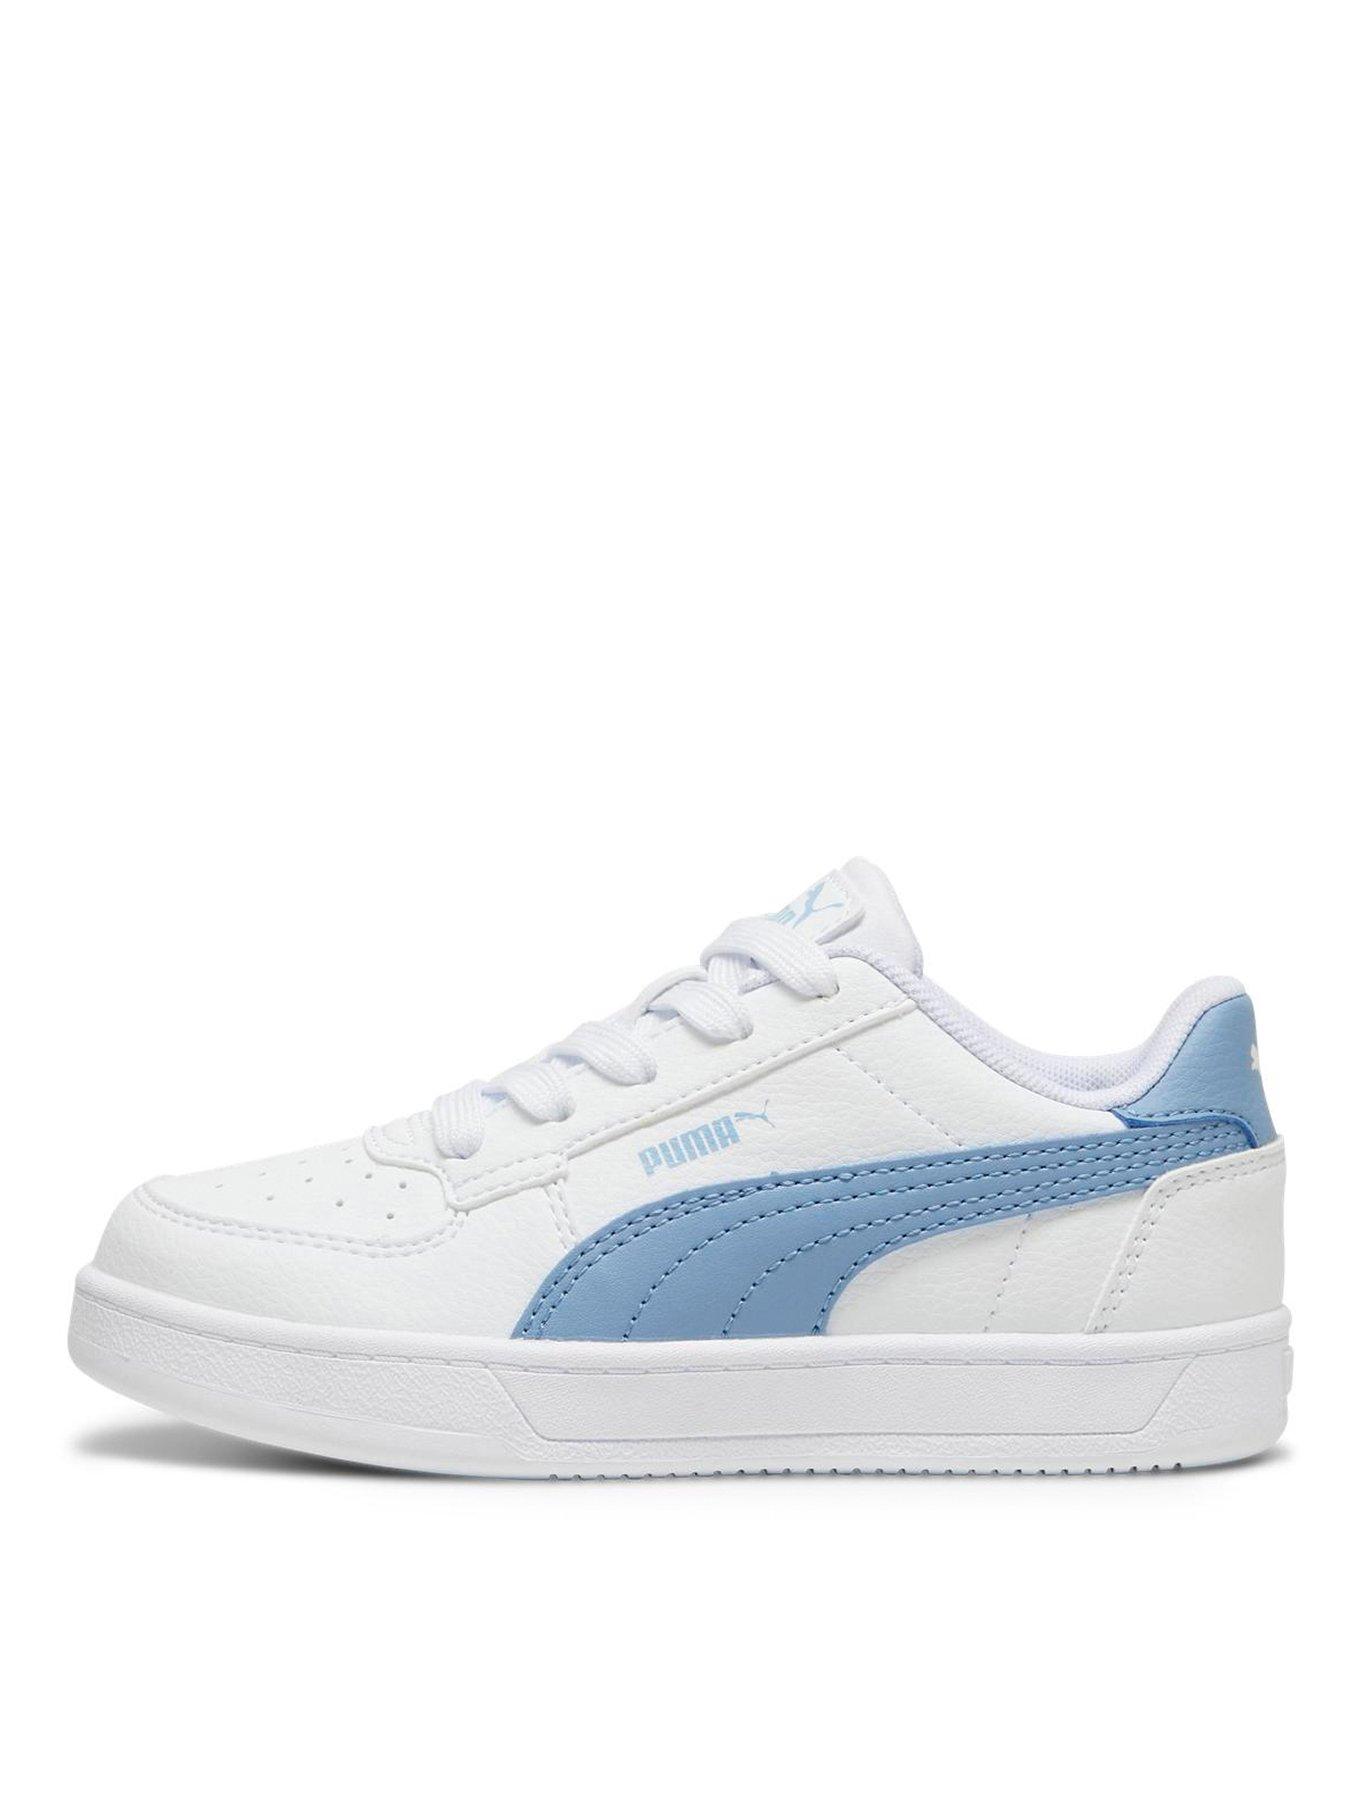 Puma Unisex Kids Caven 2.0 Trainers - White/Blue, White/Blue, Size 12 Younger